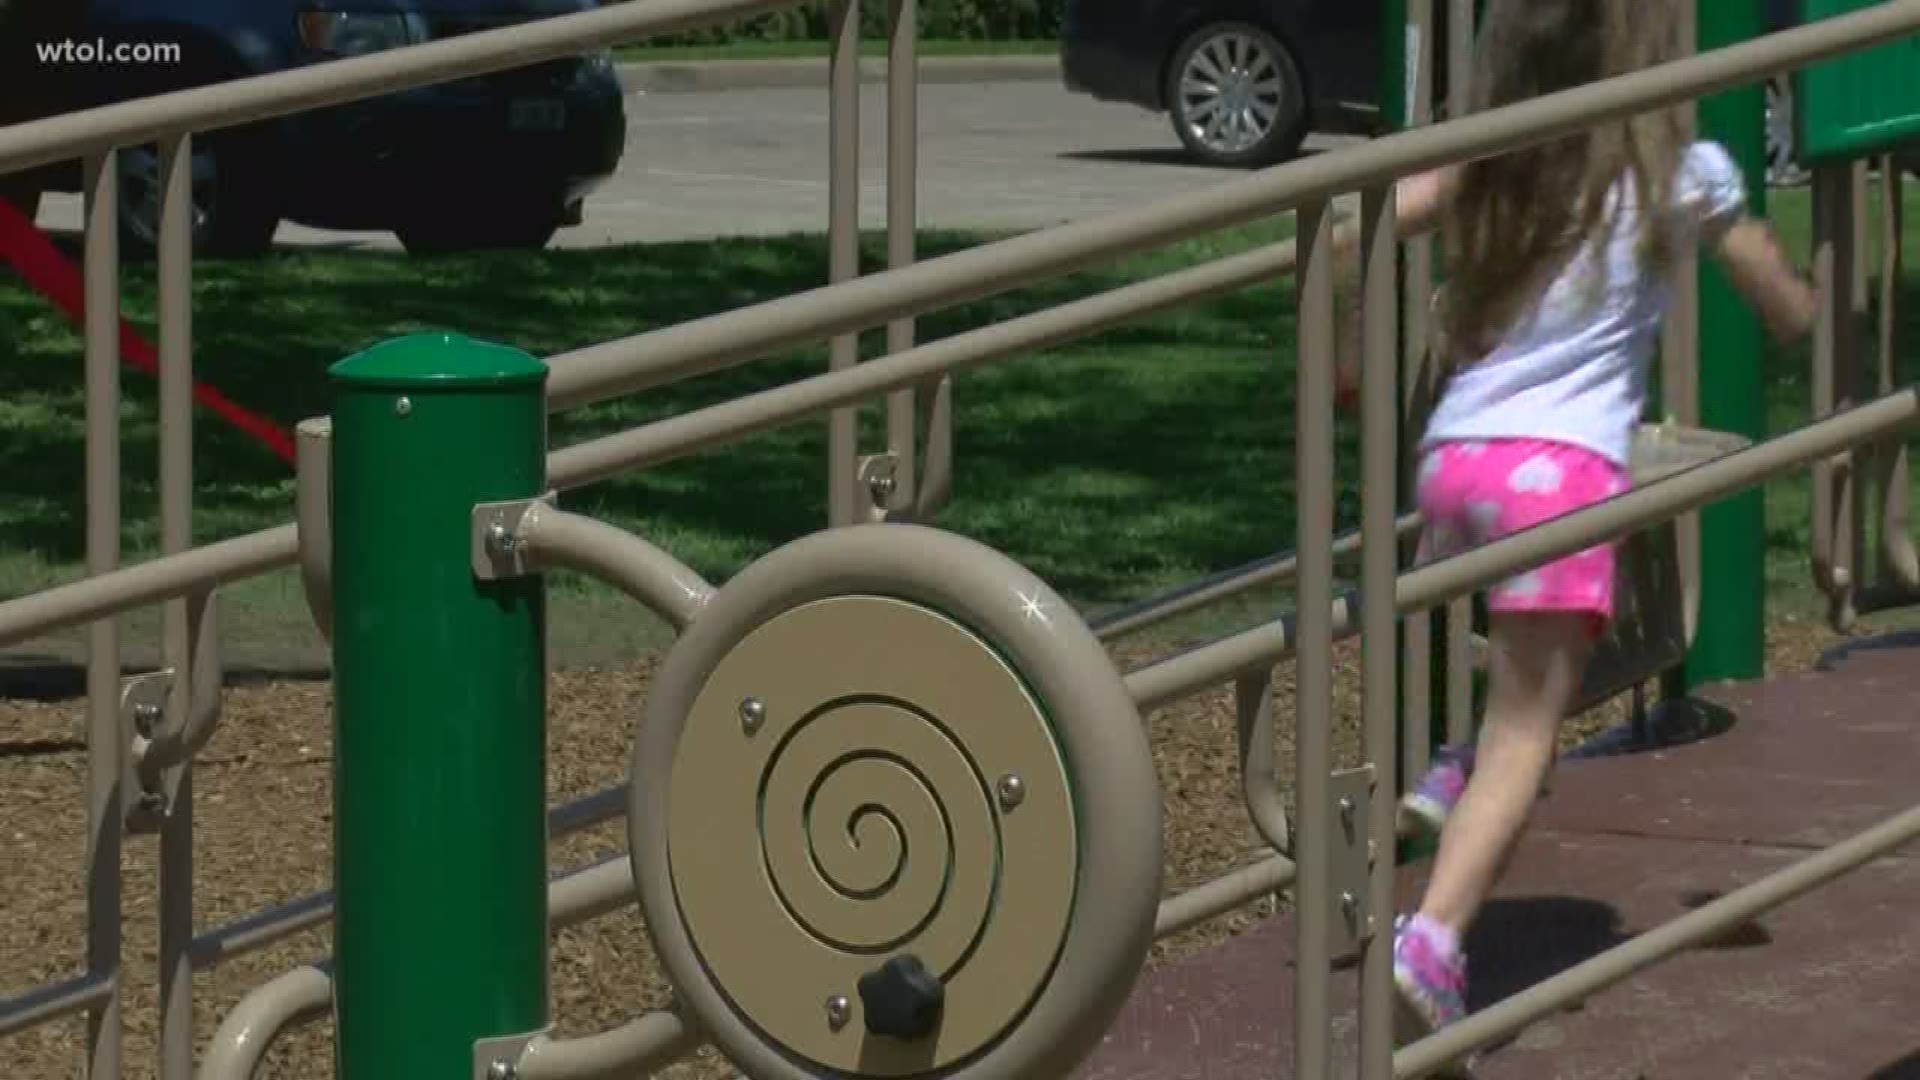 The park allows all kids to play together regardless of their physical capabilities